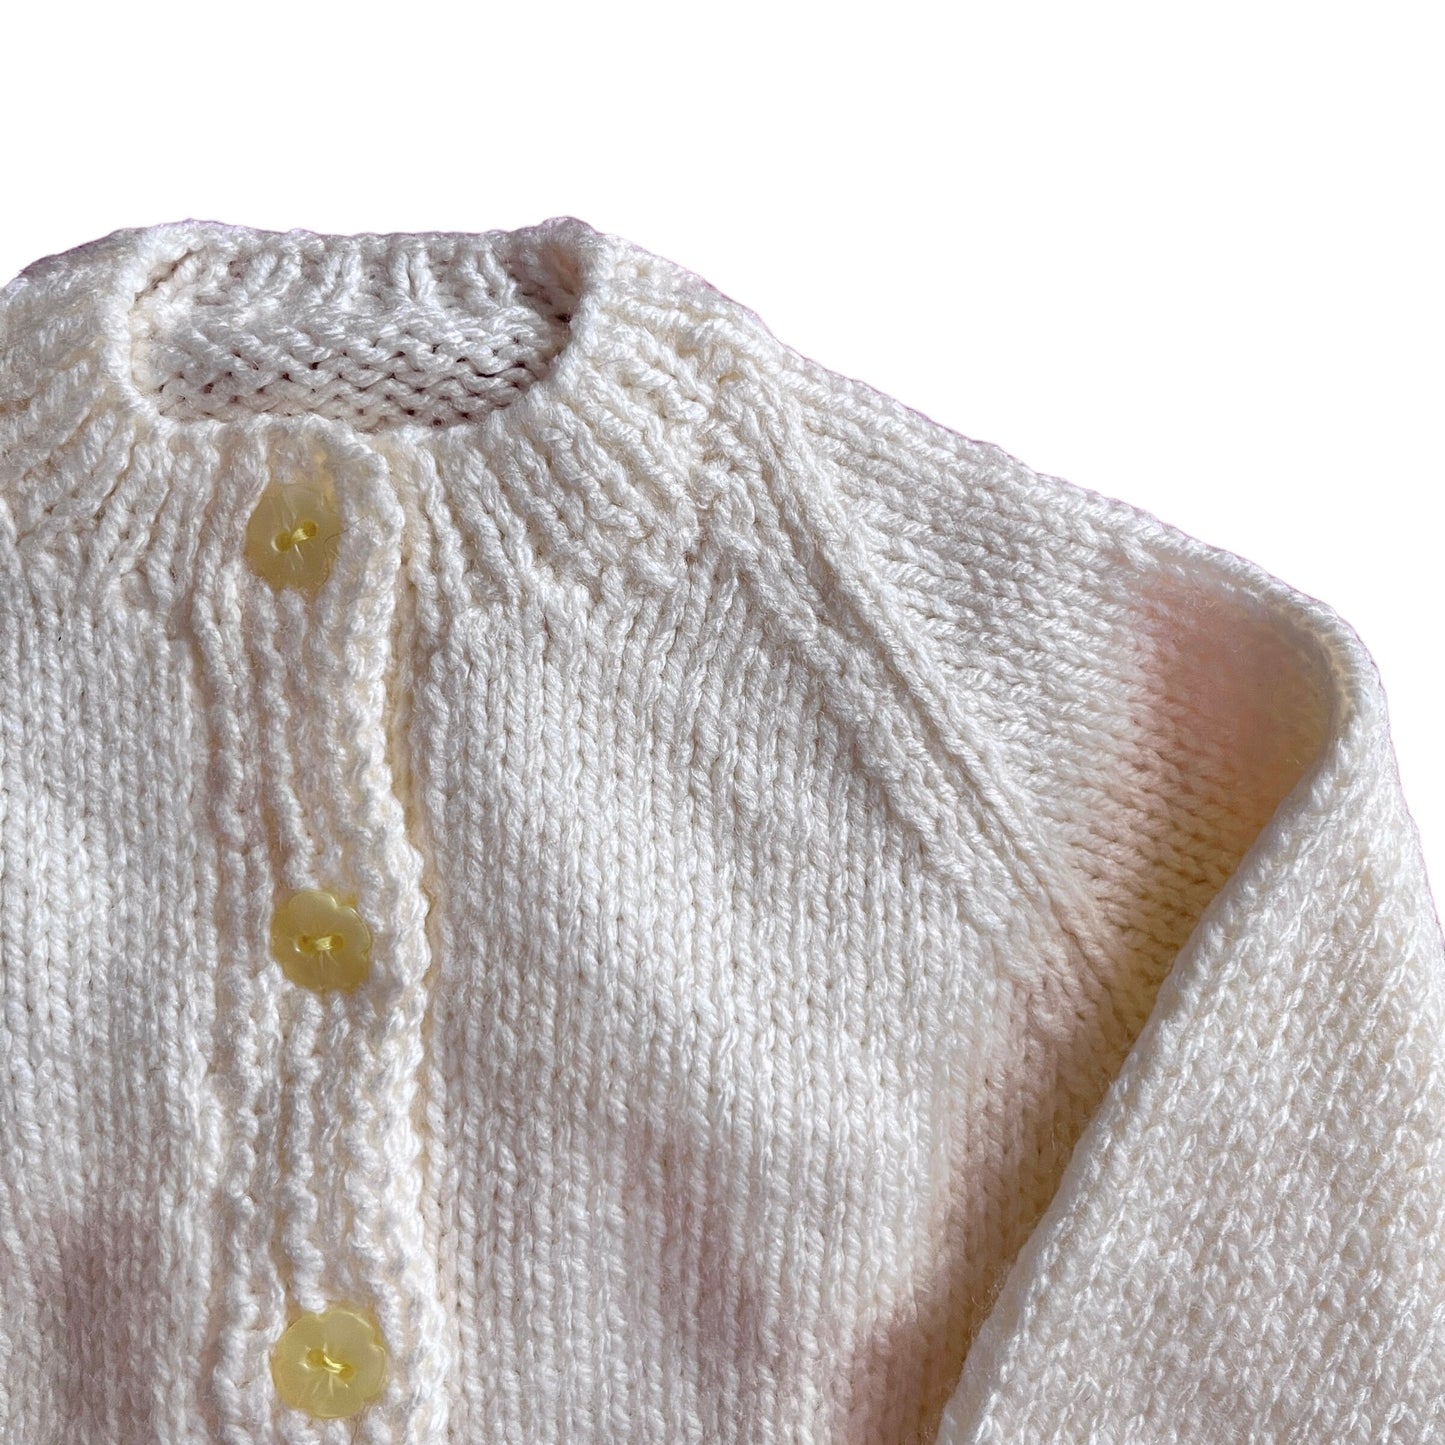 Vintage Very Pale Yellow Cardigan 0-6 Months